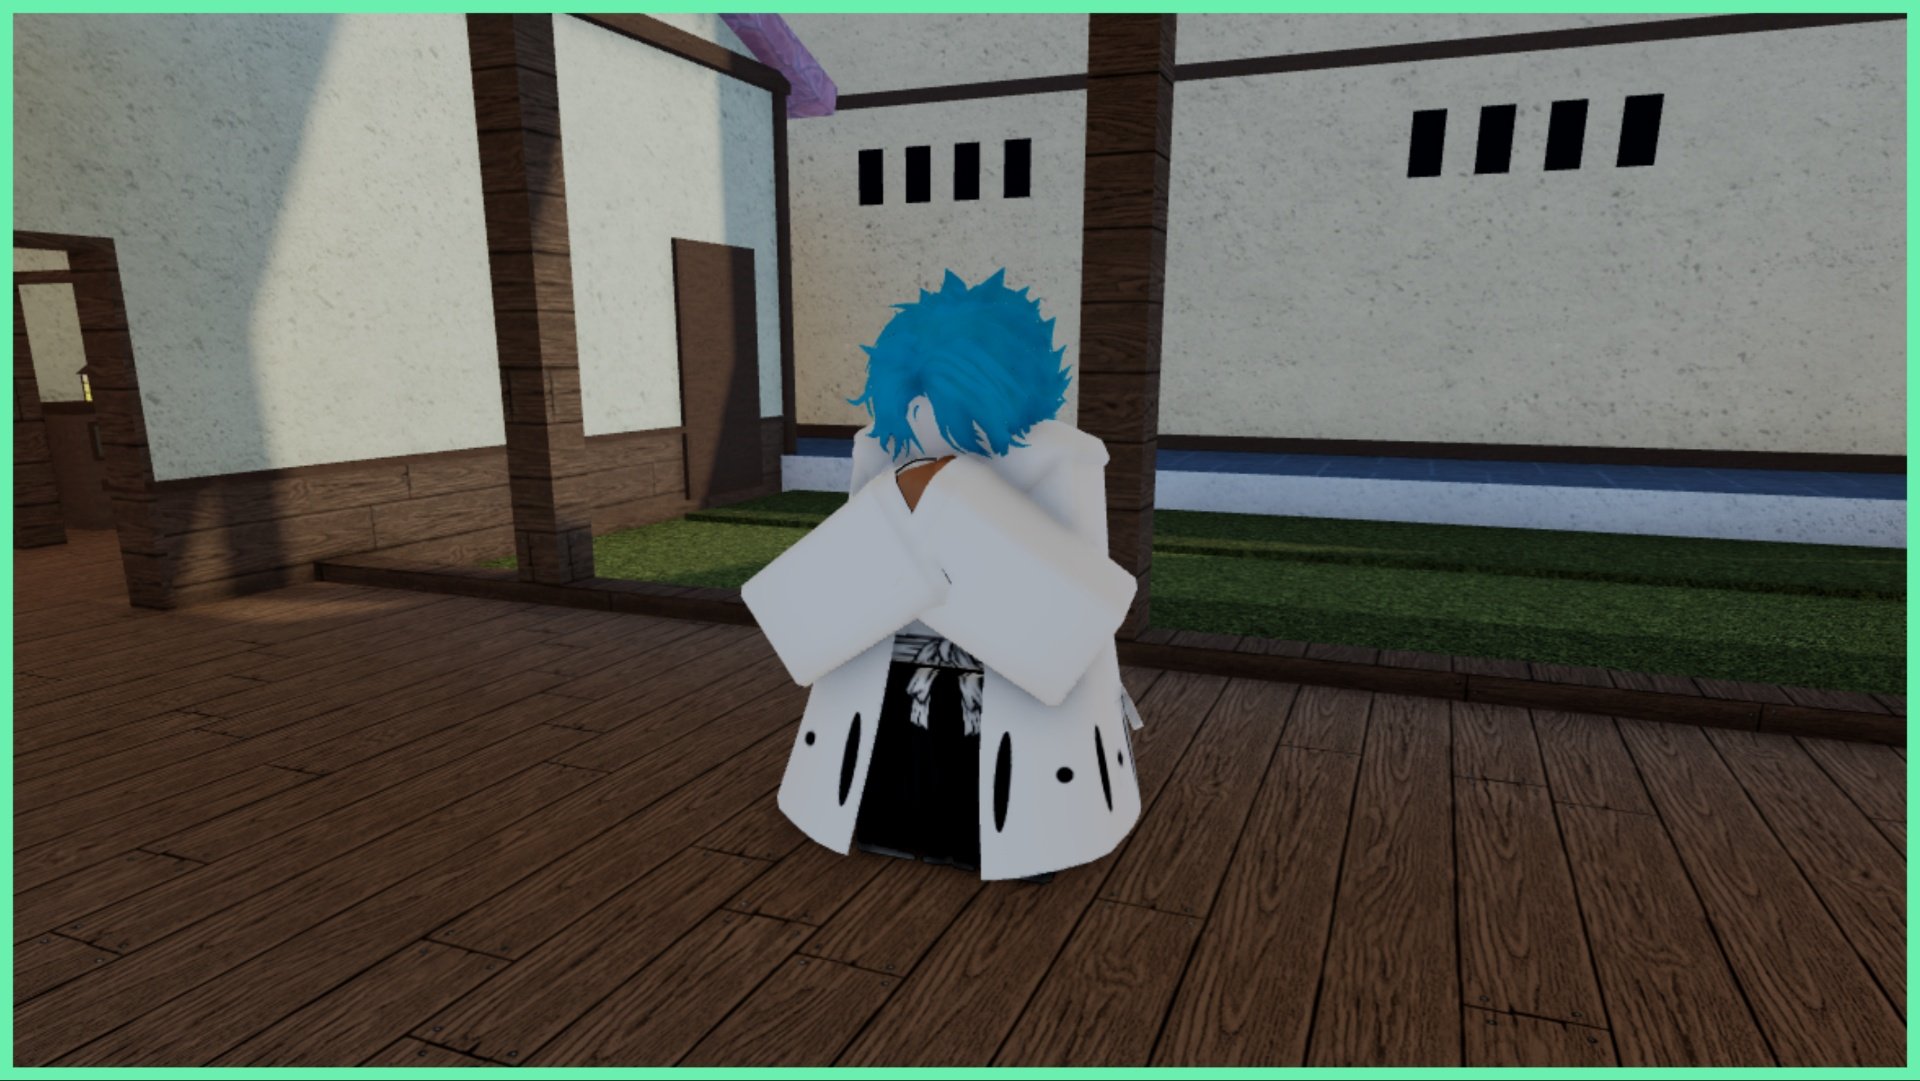 The image shows a blue haired NPC who is hiding his face behind his hands. He is wearing a long white cloak and is stook on a wooden platform connecting two houses with more homes in the background of him